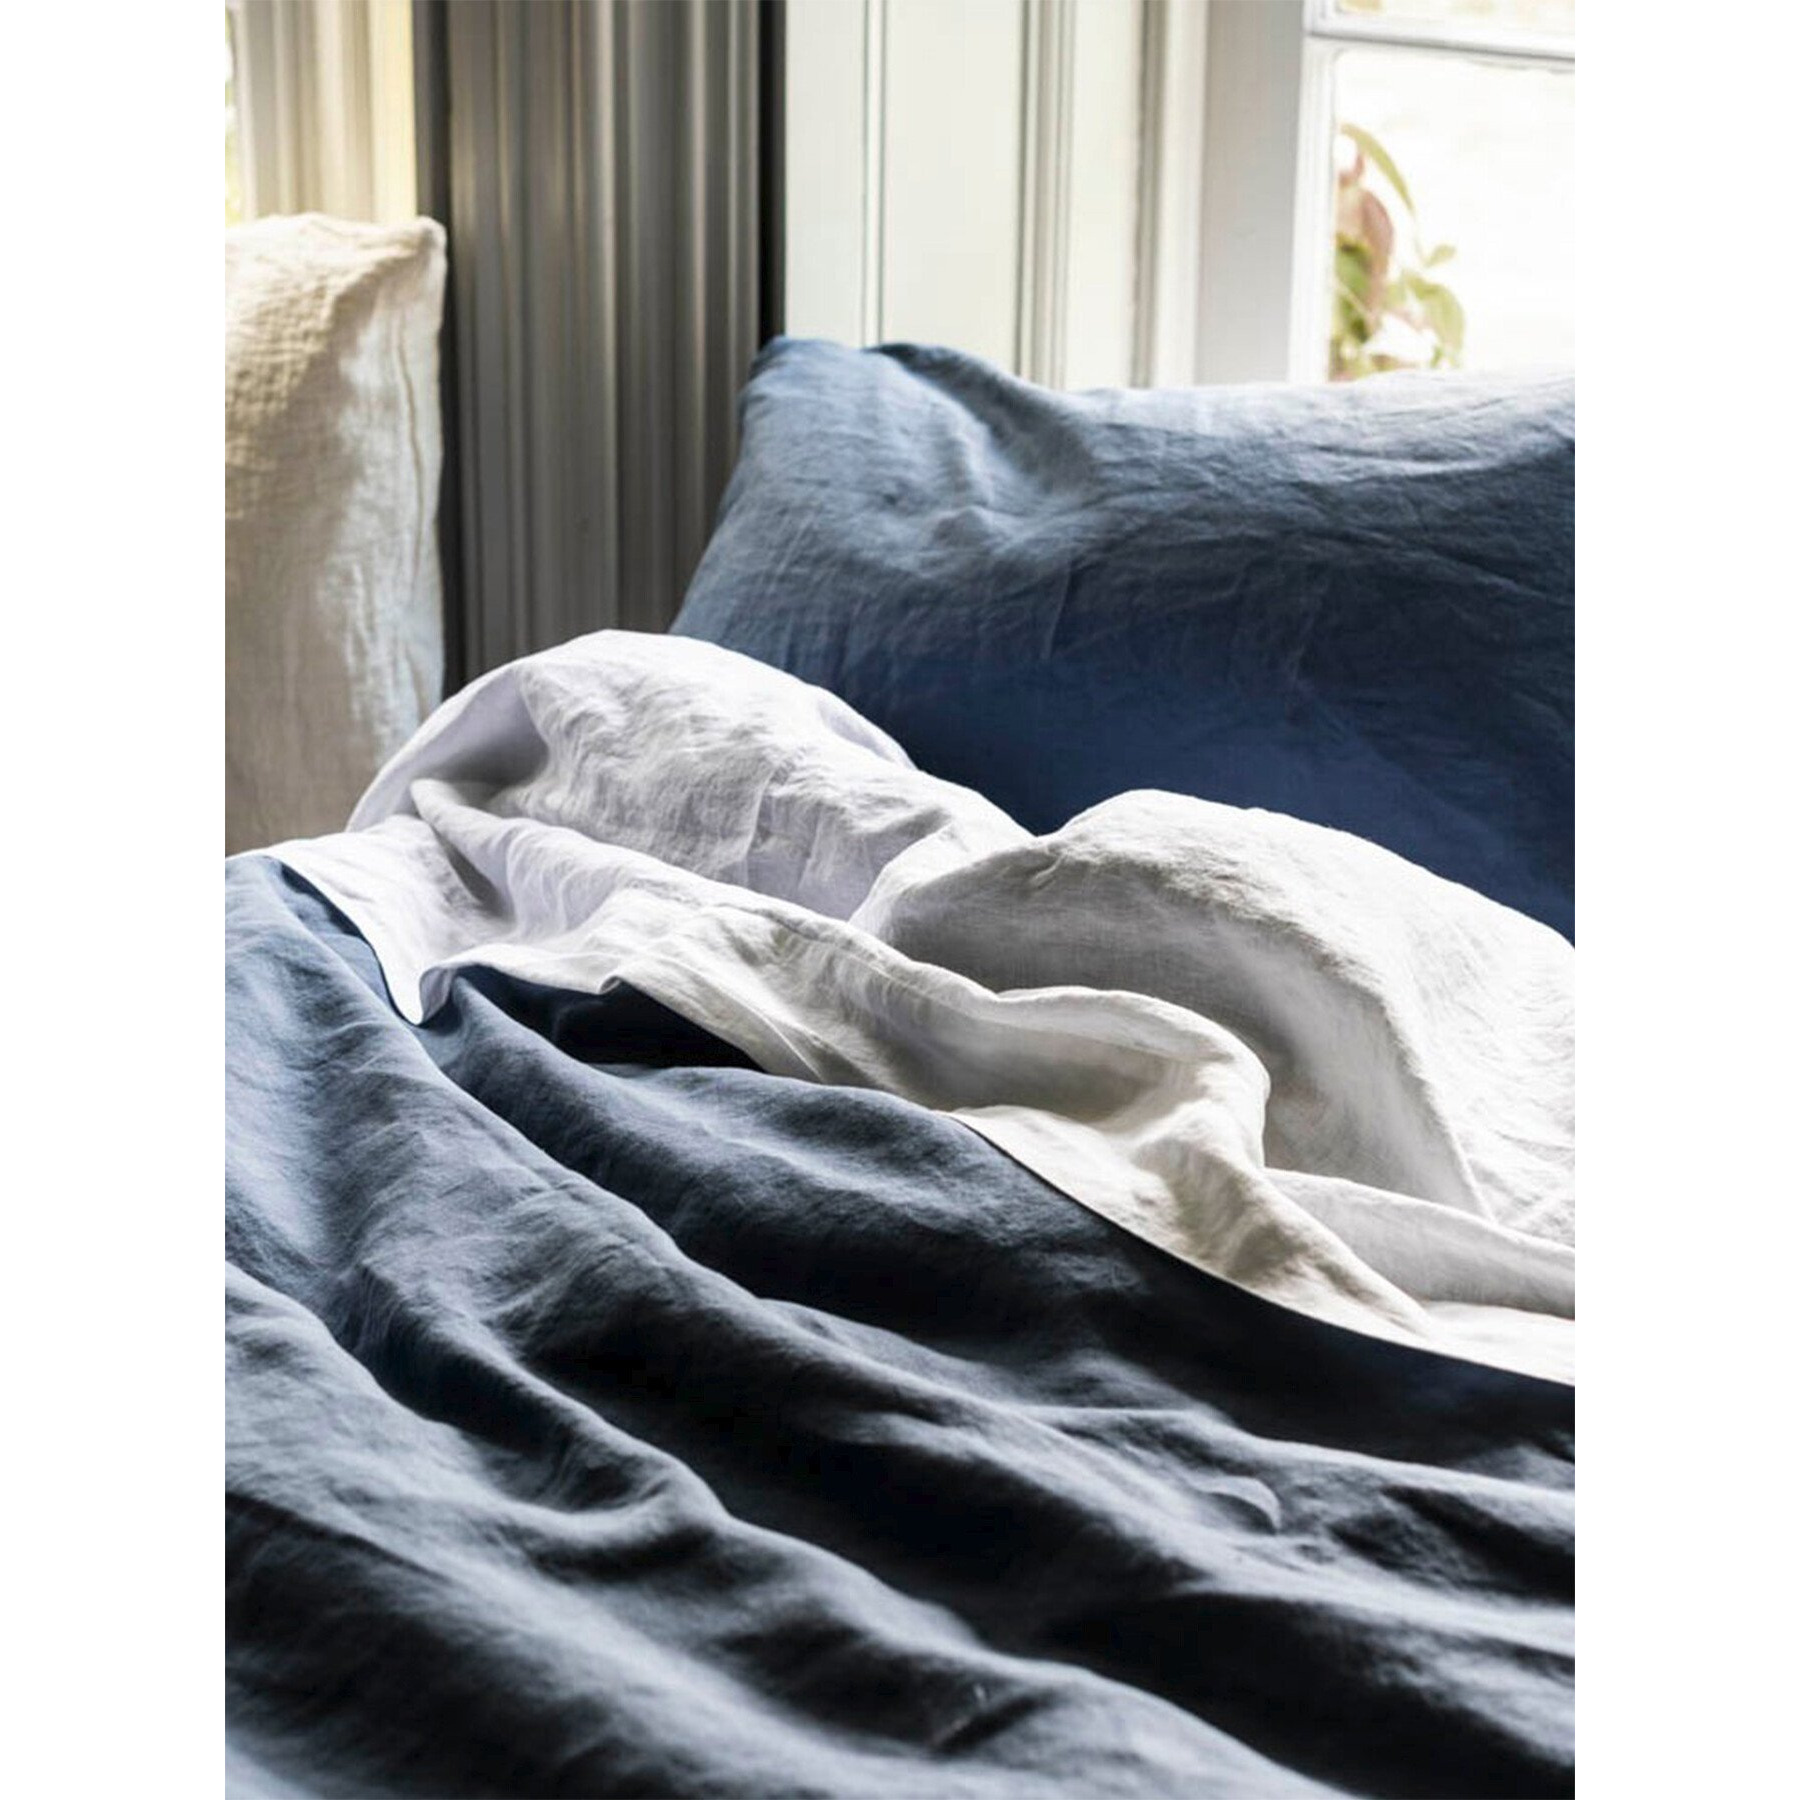 Piglet in Bed Linen Fitted Sheet - Size King Blue - image 1